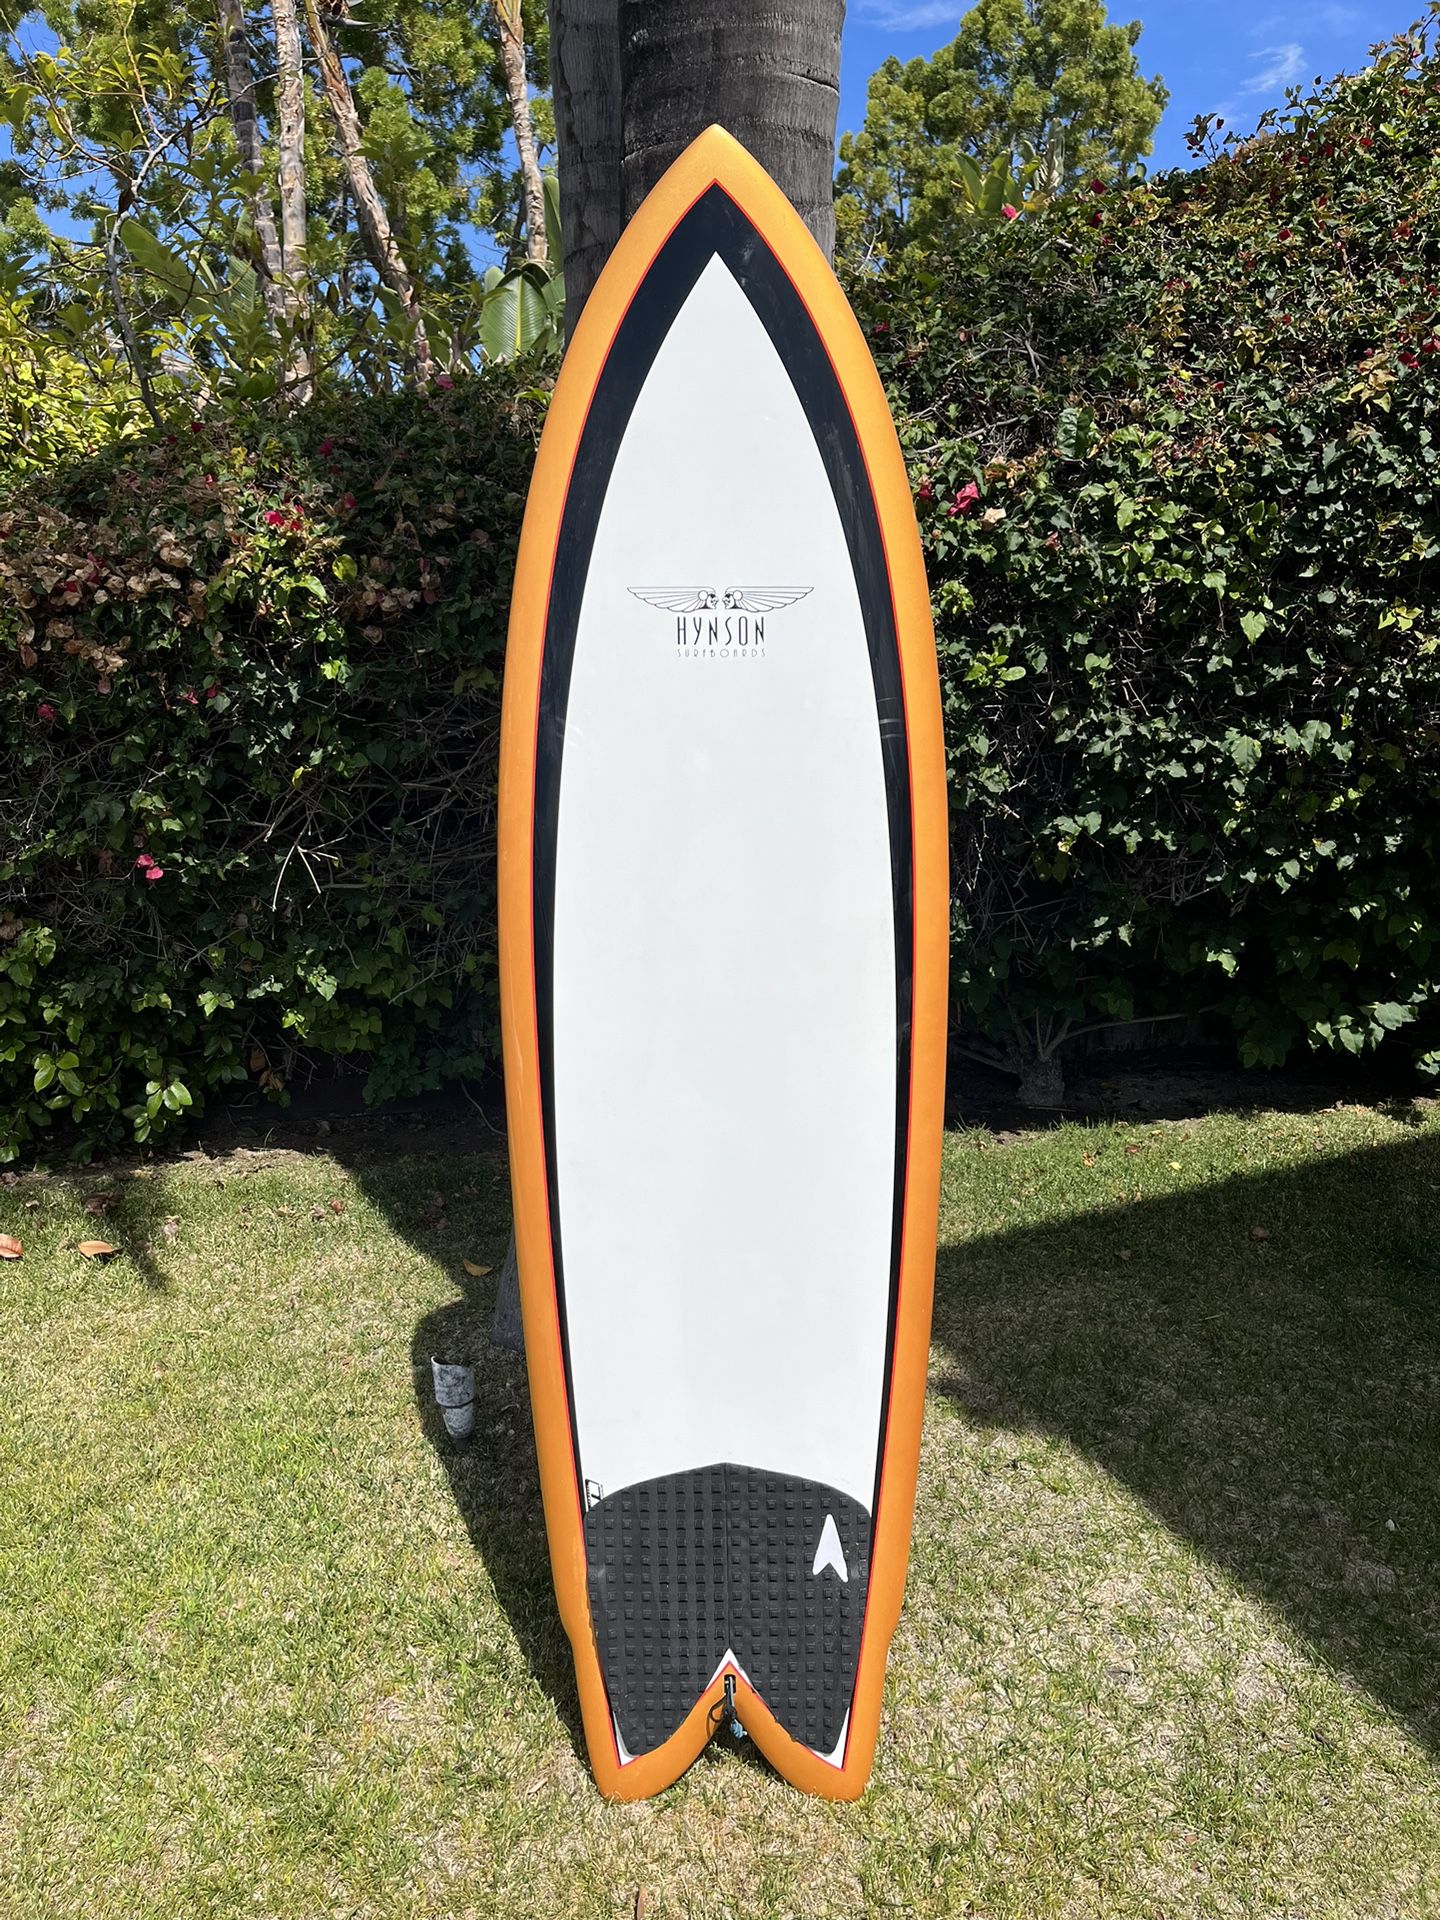 Mike Hynson 6’6 Black knight Quad Fish Surfboard for Sale in San Diego, CA  - OfferUp